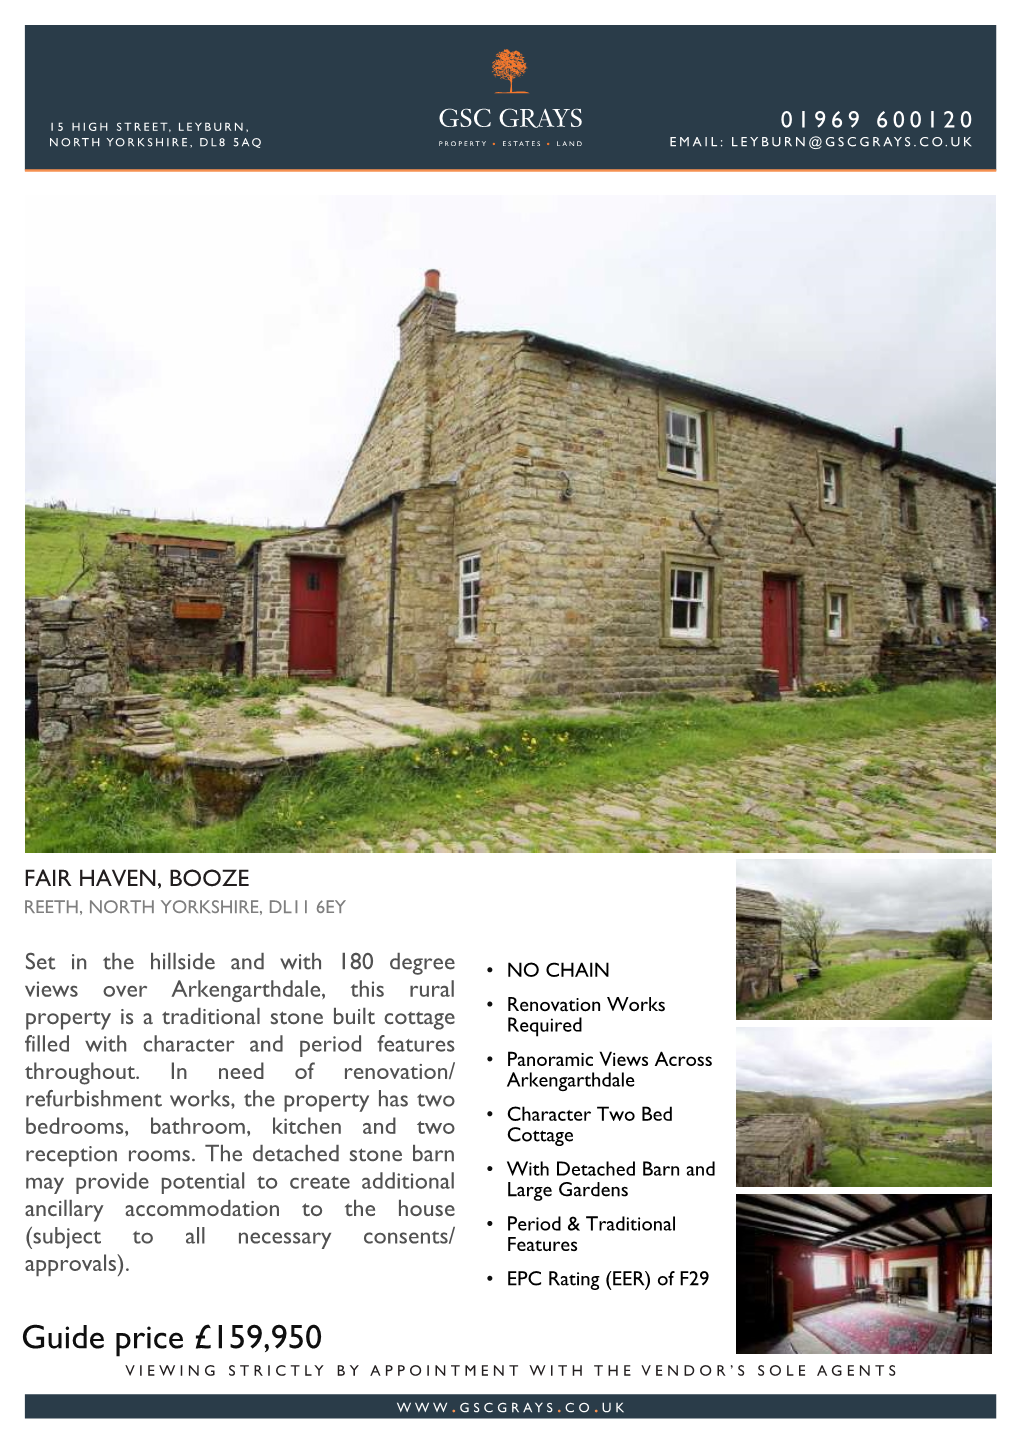 Guide Price £159,950 VIEWING STRICTLY by APPOINTMENT with the VENDOR’S SOLE AGENTS